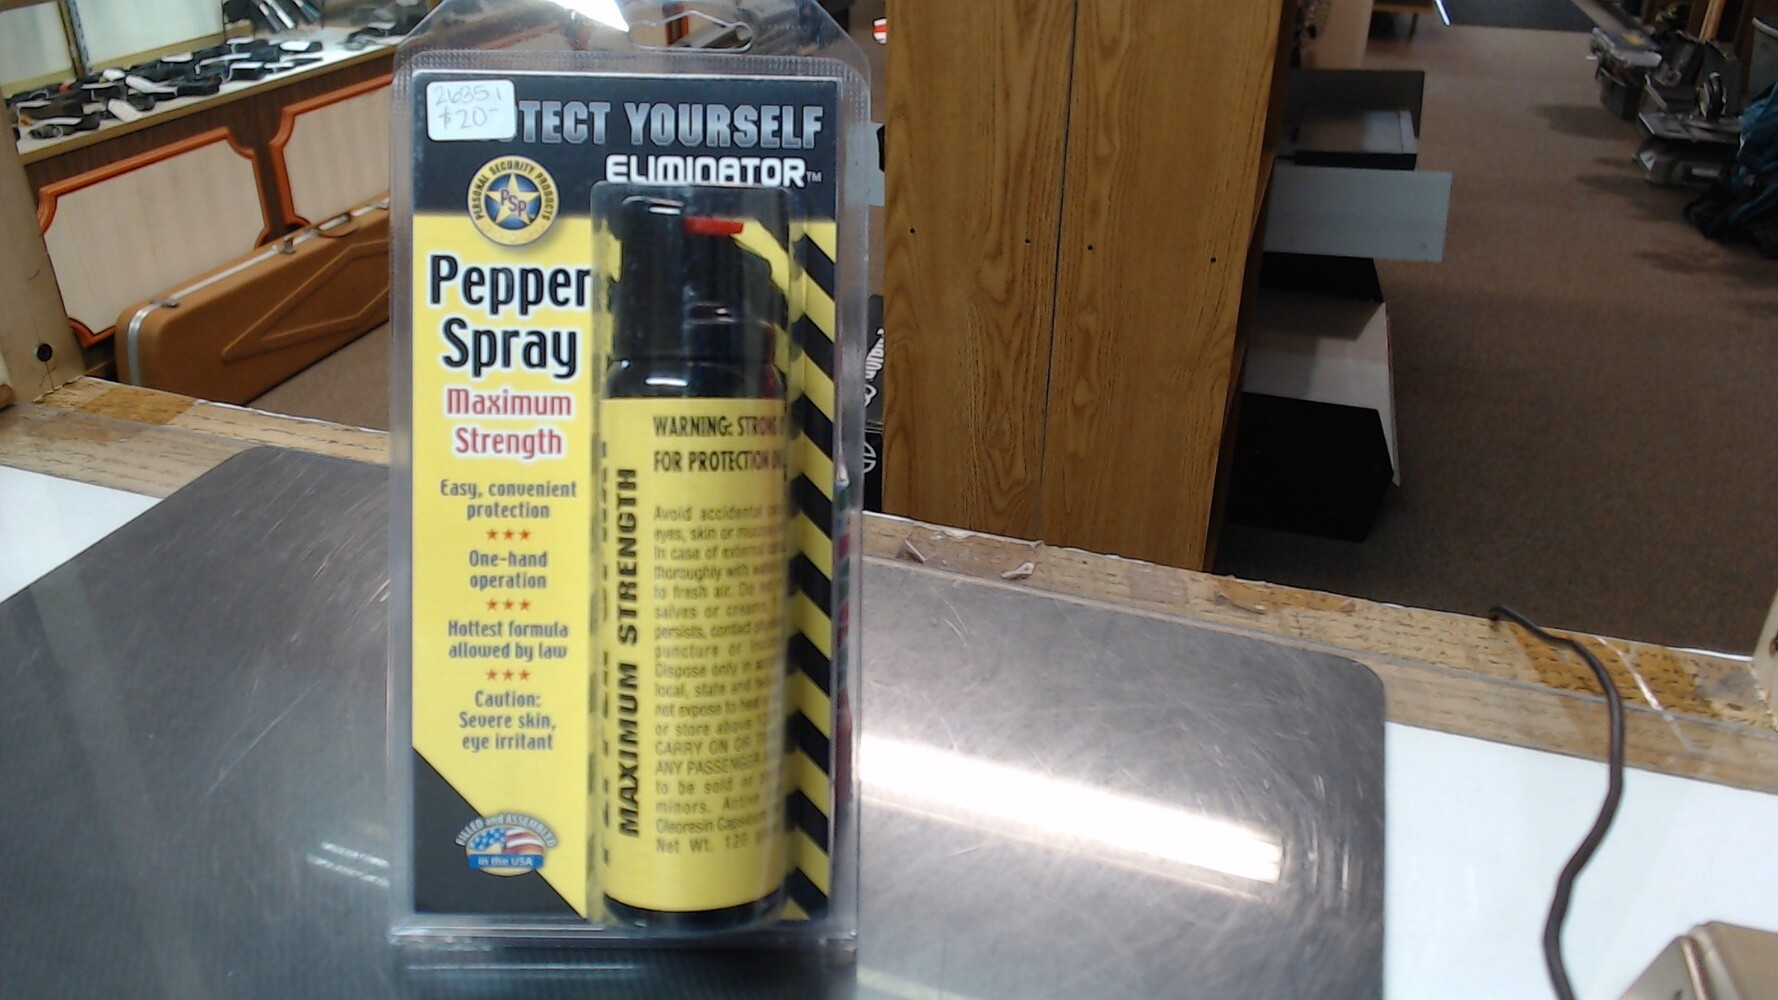 protect yourself eliminator pepper spray. 120 grams.